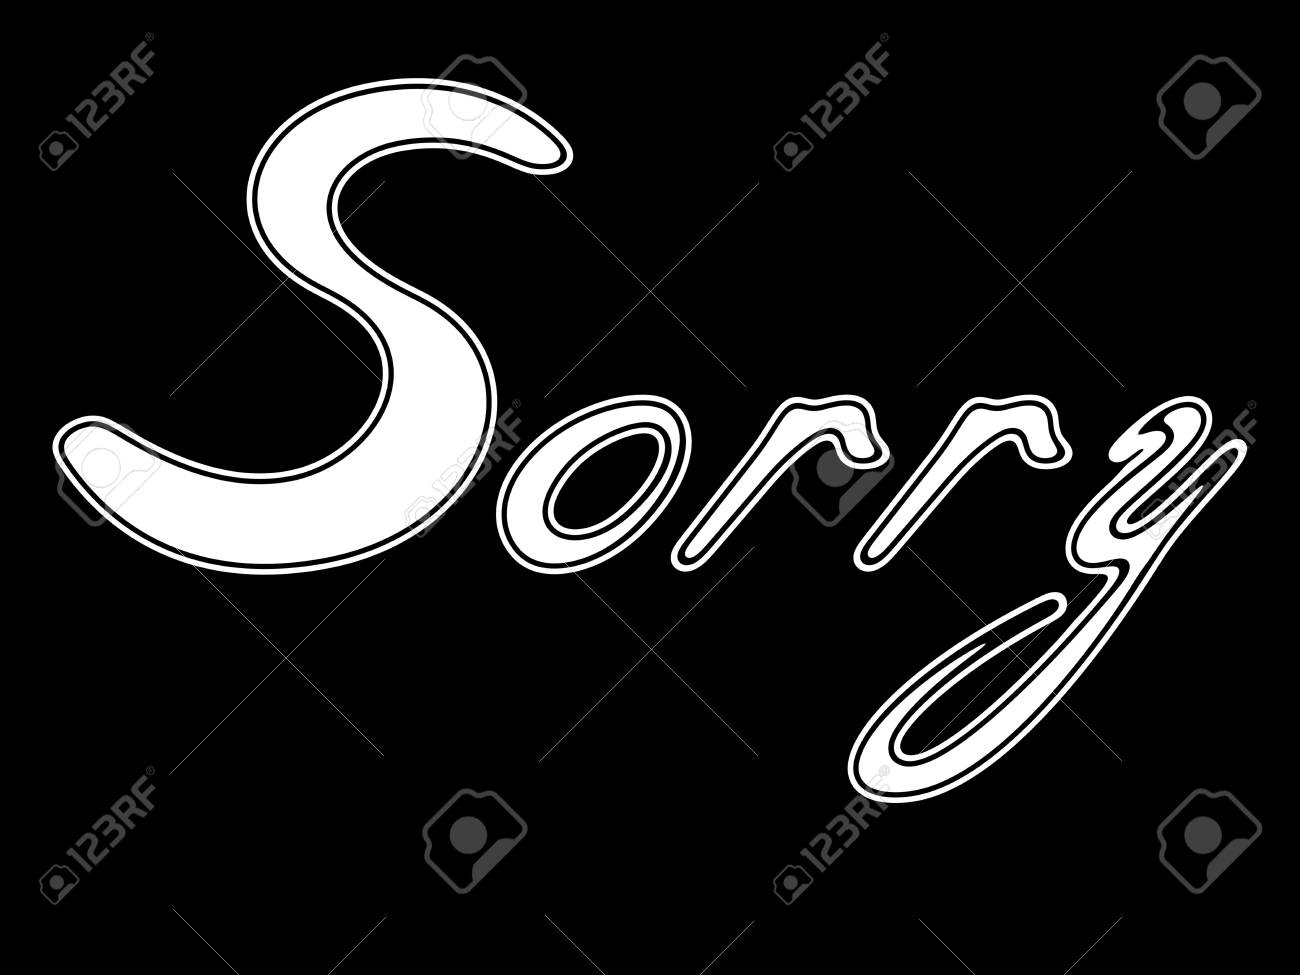 Sorry On Black Background Stock Photo Picture And Royalty